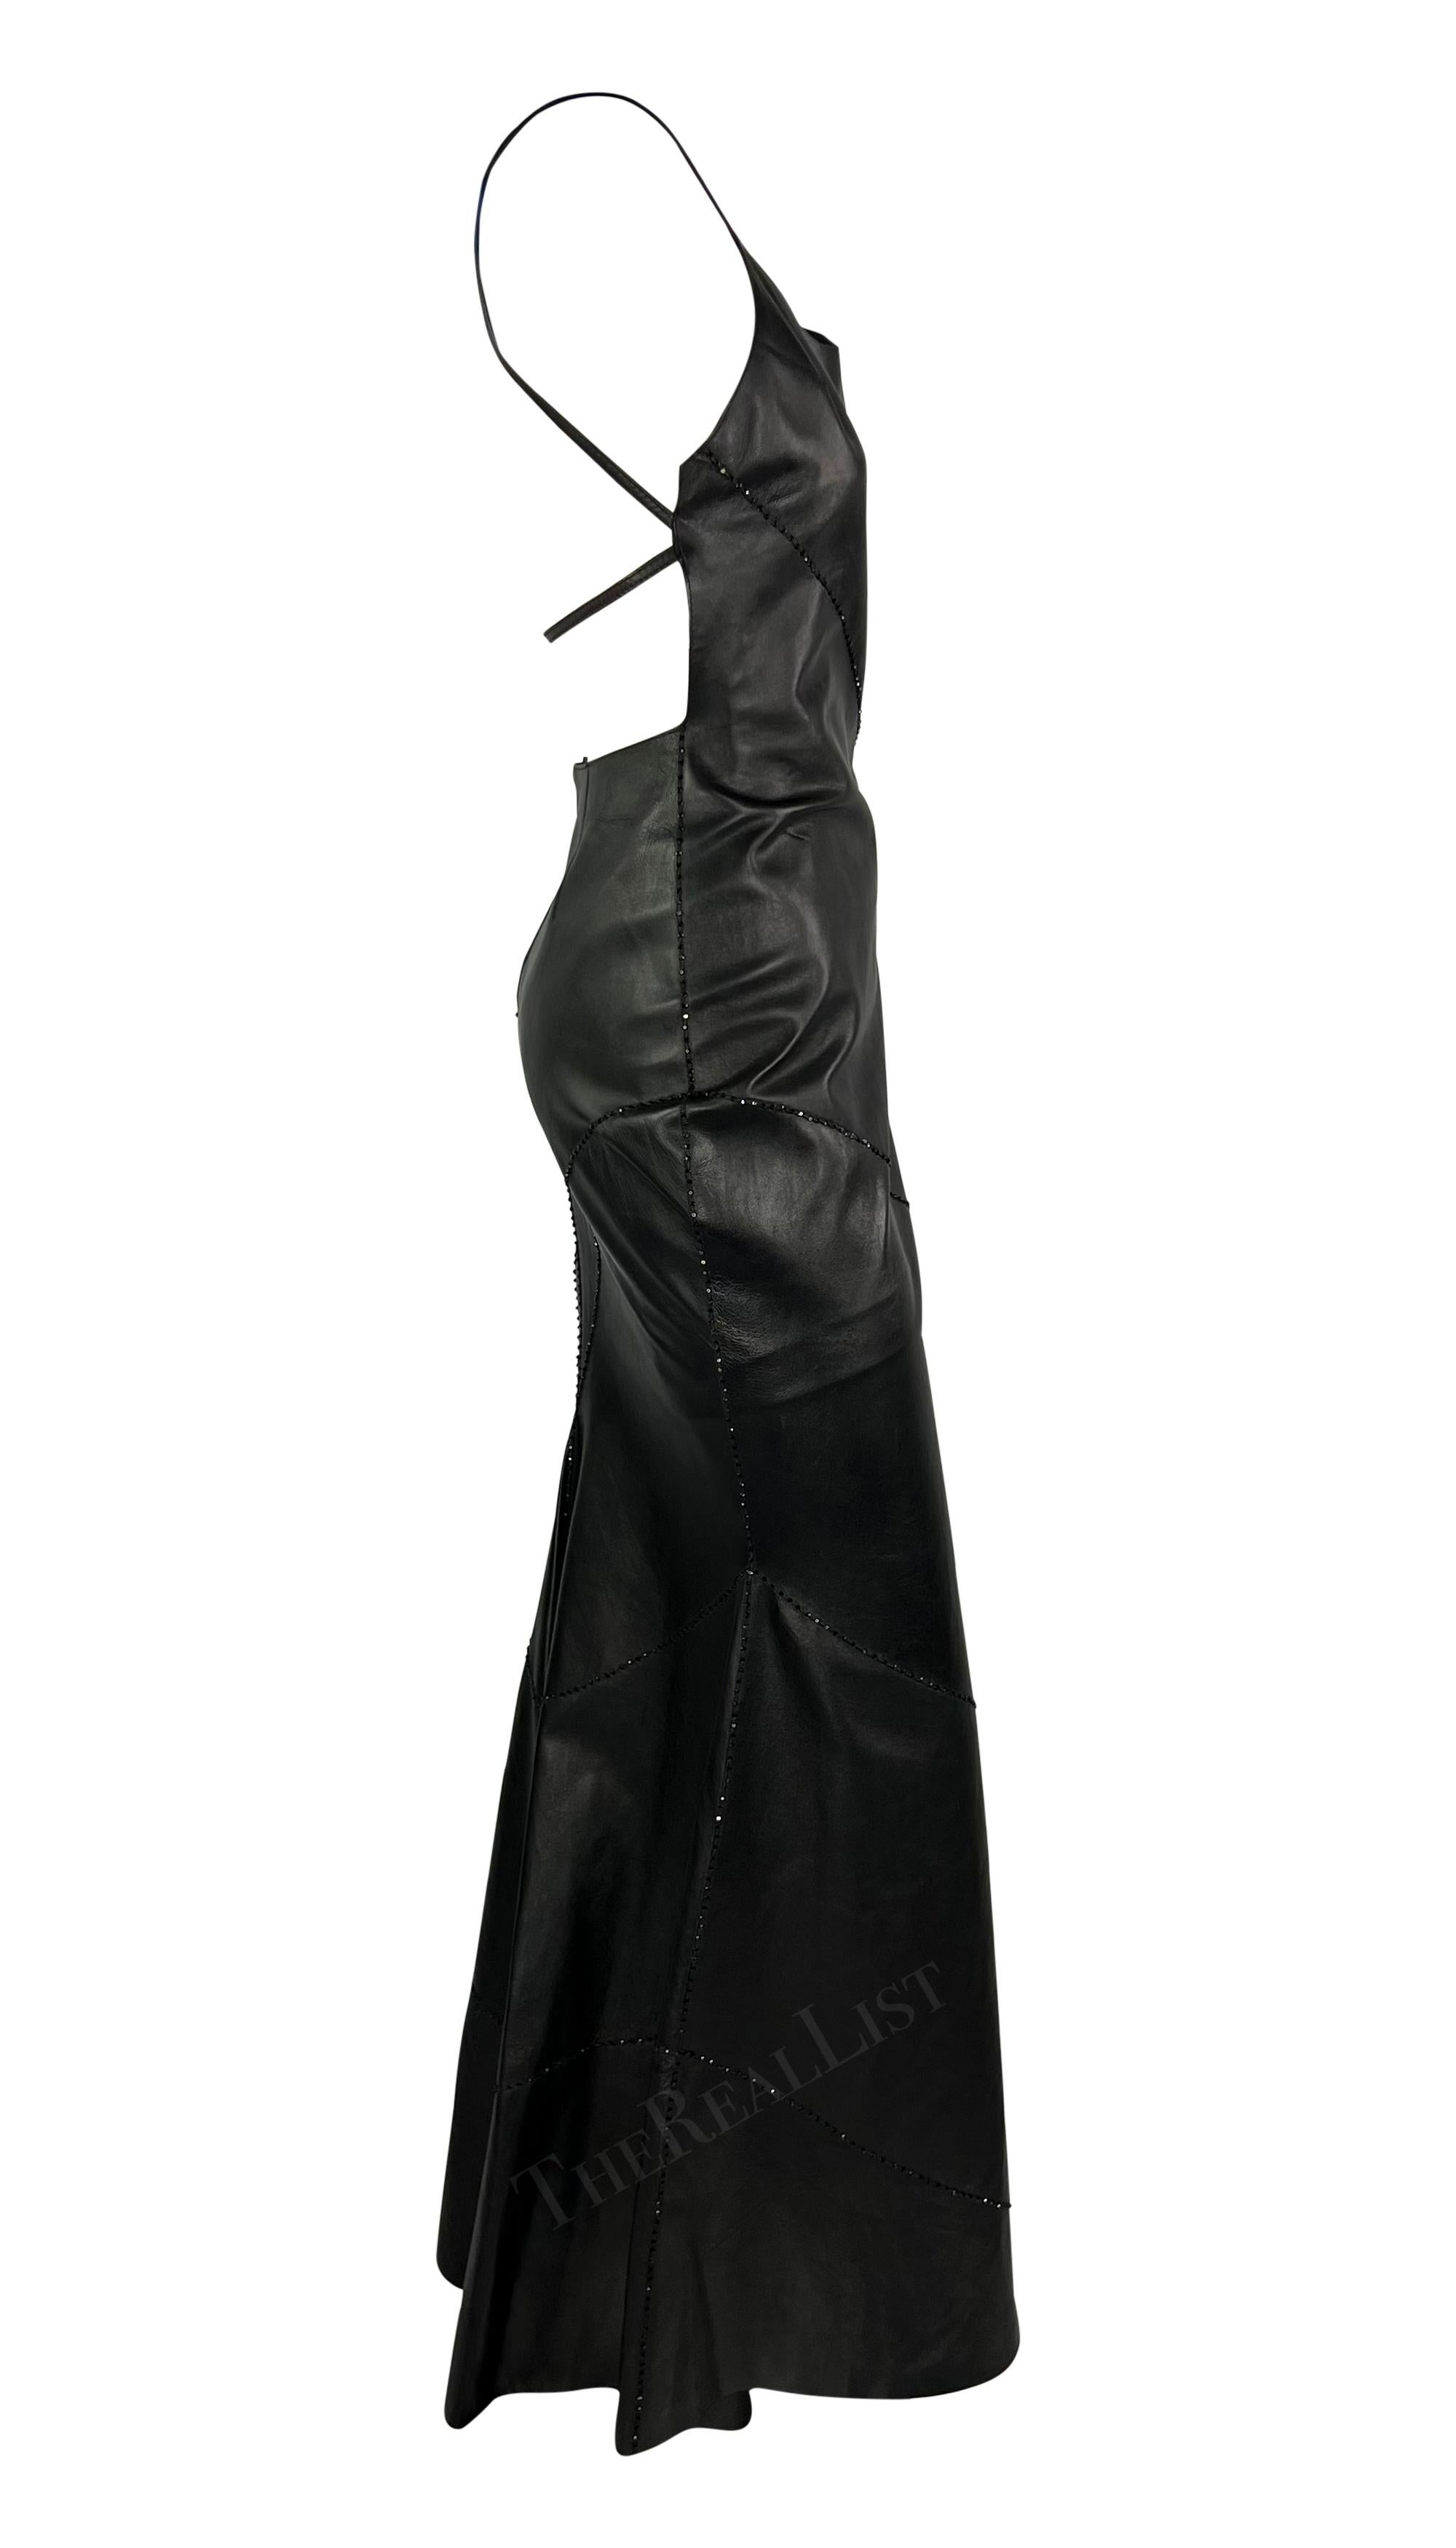 This stunning black leather gown by Pamela Dennis Couture dates back to the early 2000s. Crafted entirely from black leather, it boasts intricate asymmetric lines of black seed beads across its floor-length silhouette. The dress features a high